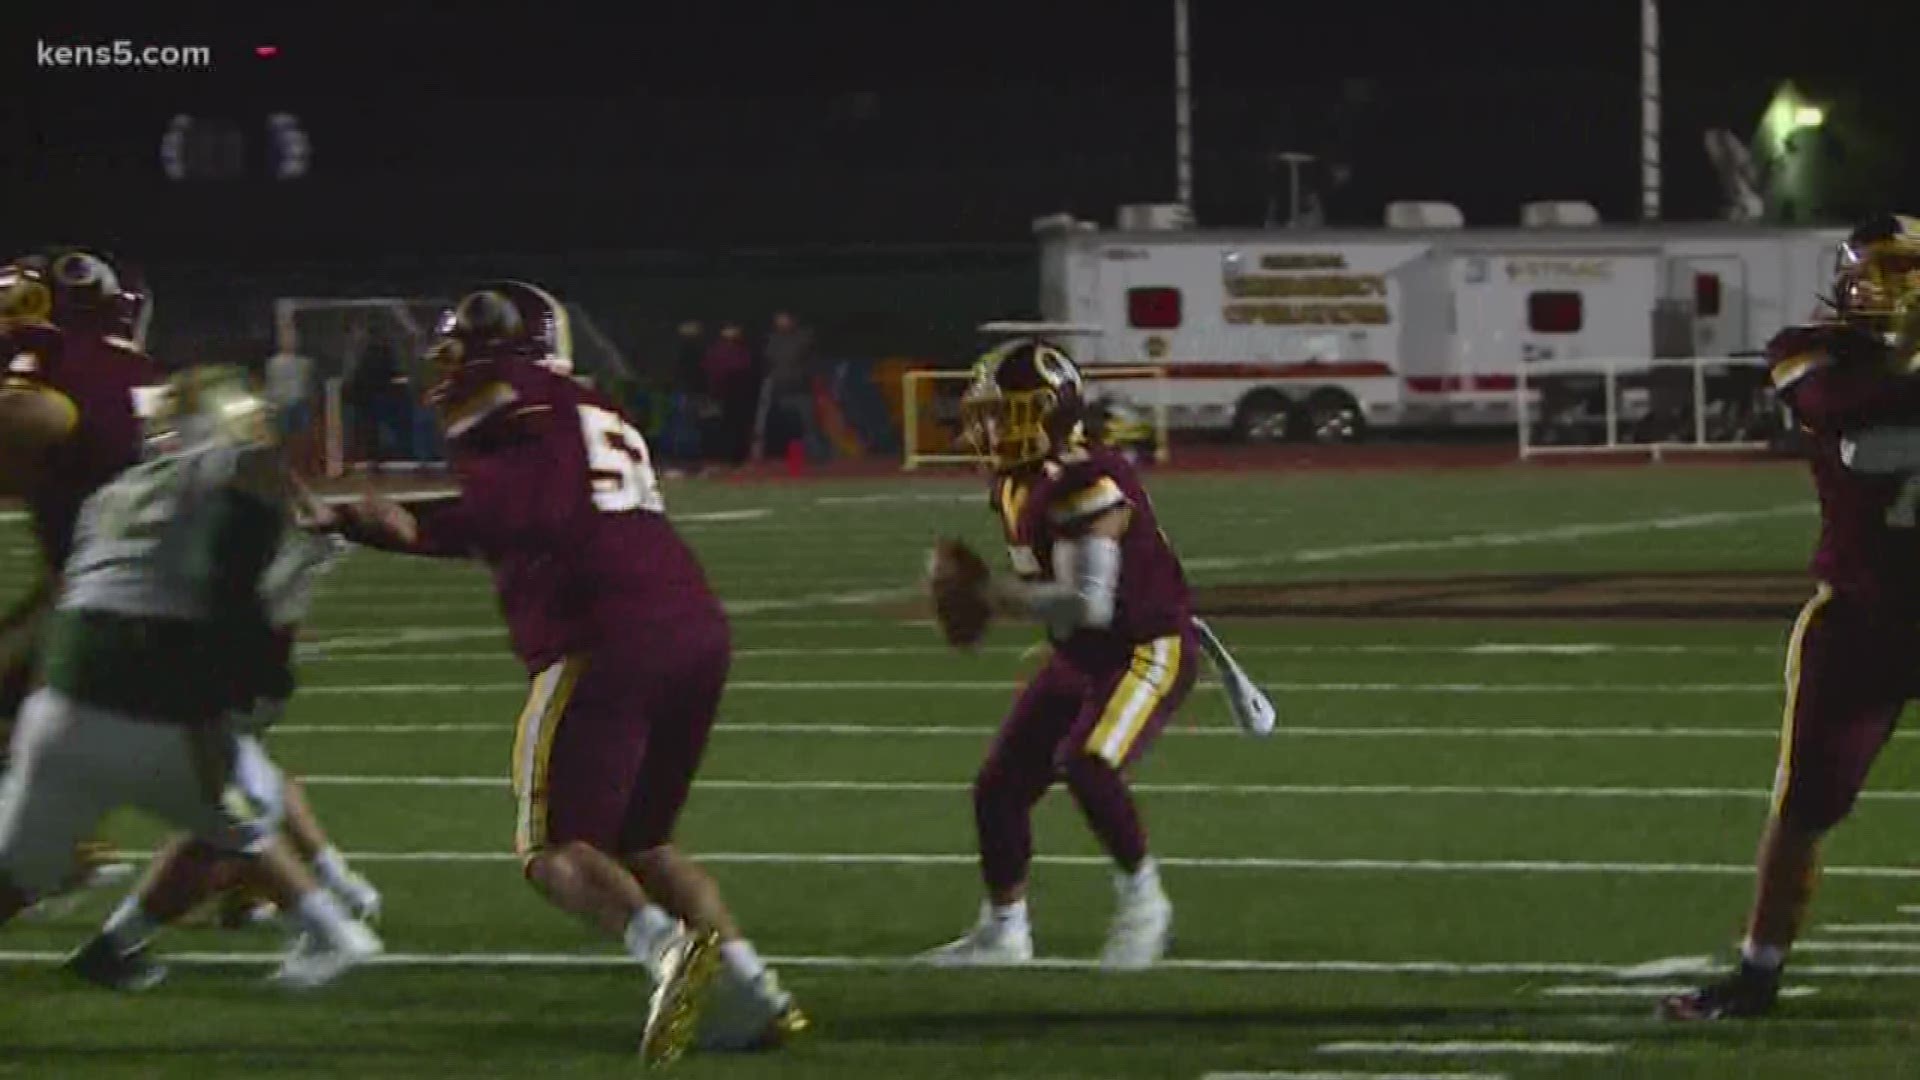 Among the highlights: A defeat of McCollum by Harlandale and a rout of Highlands at the hands of Brackenridge.